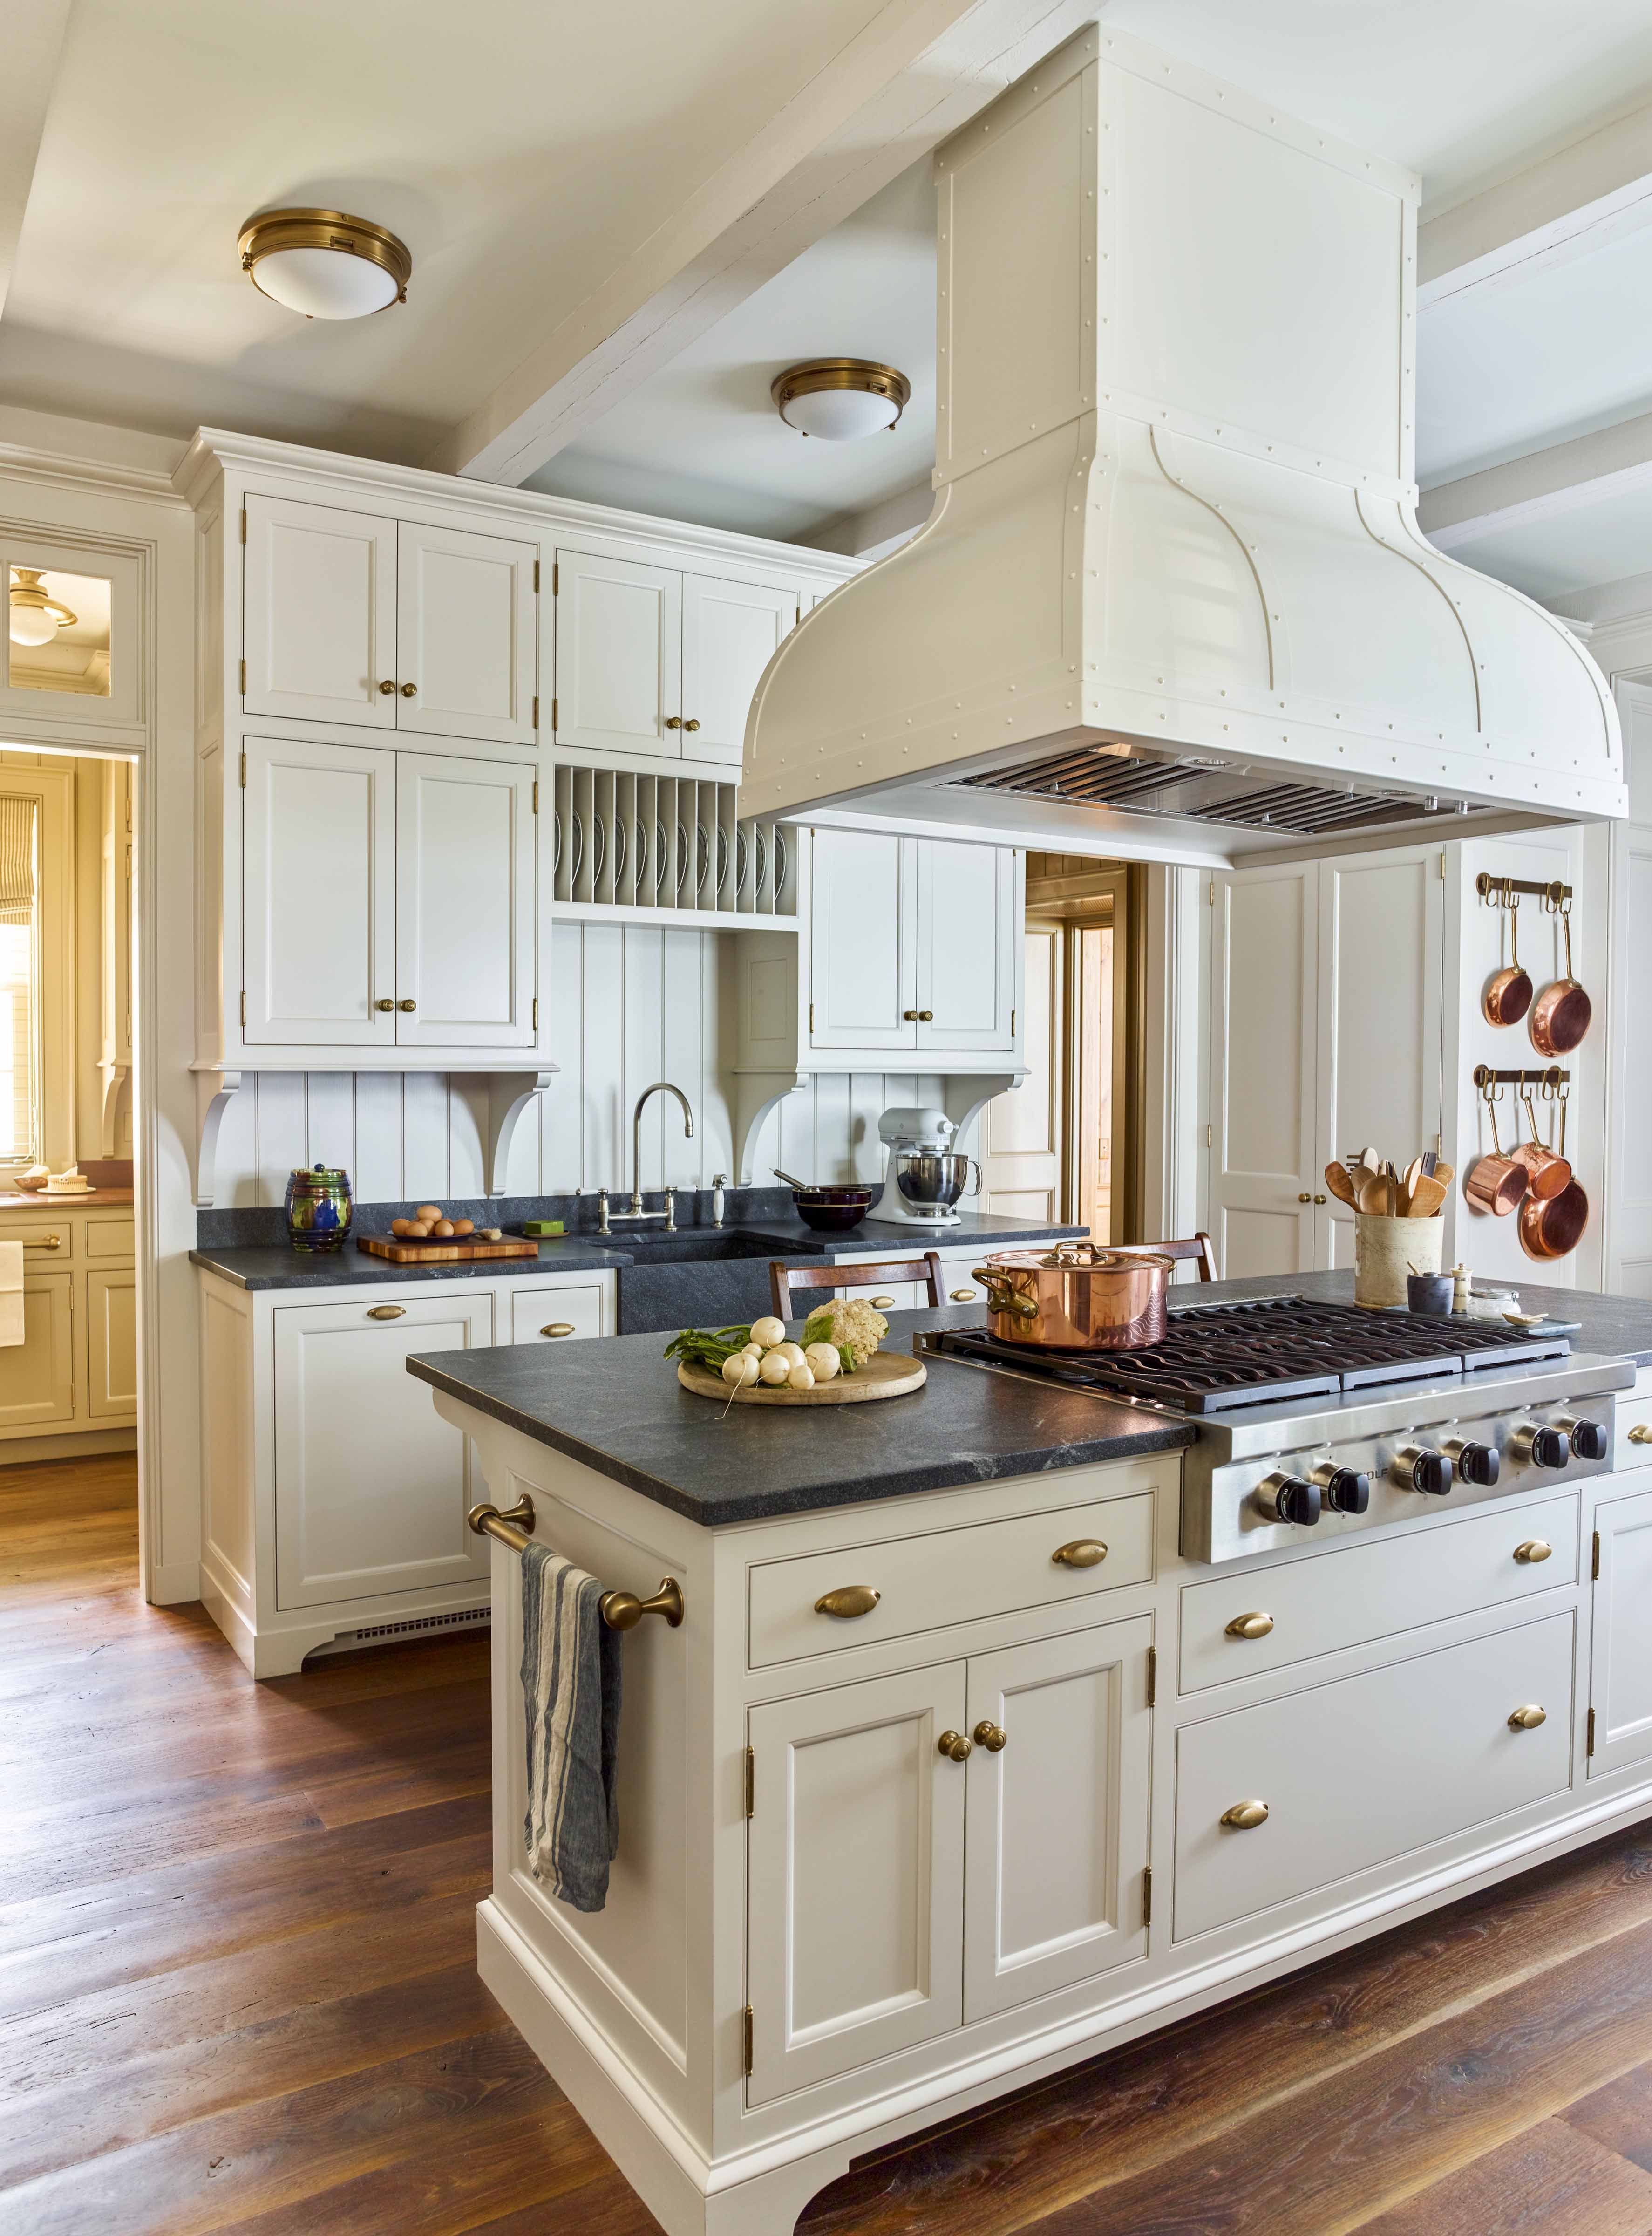 European Kitchen Cabinets - Pictures and Design Ideas